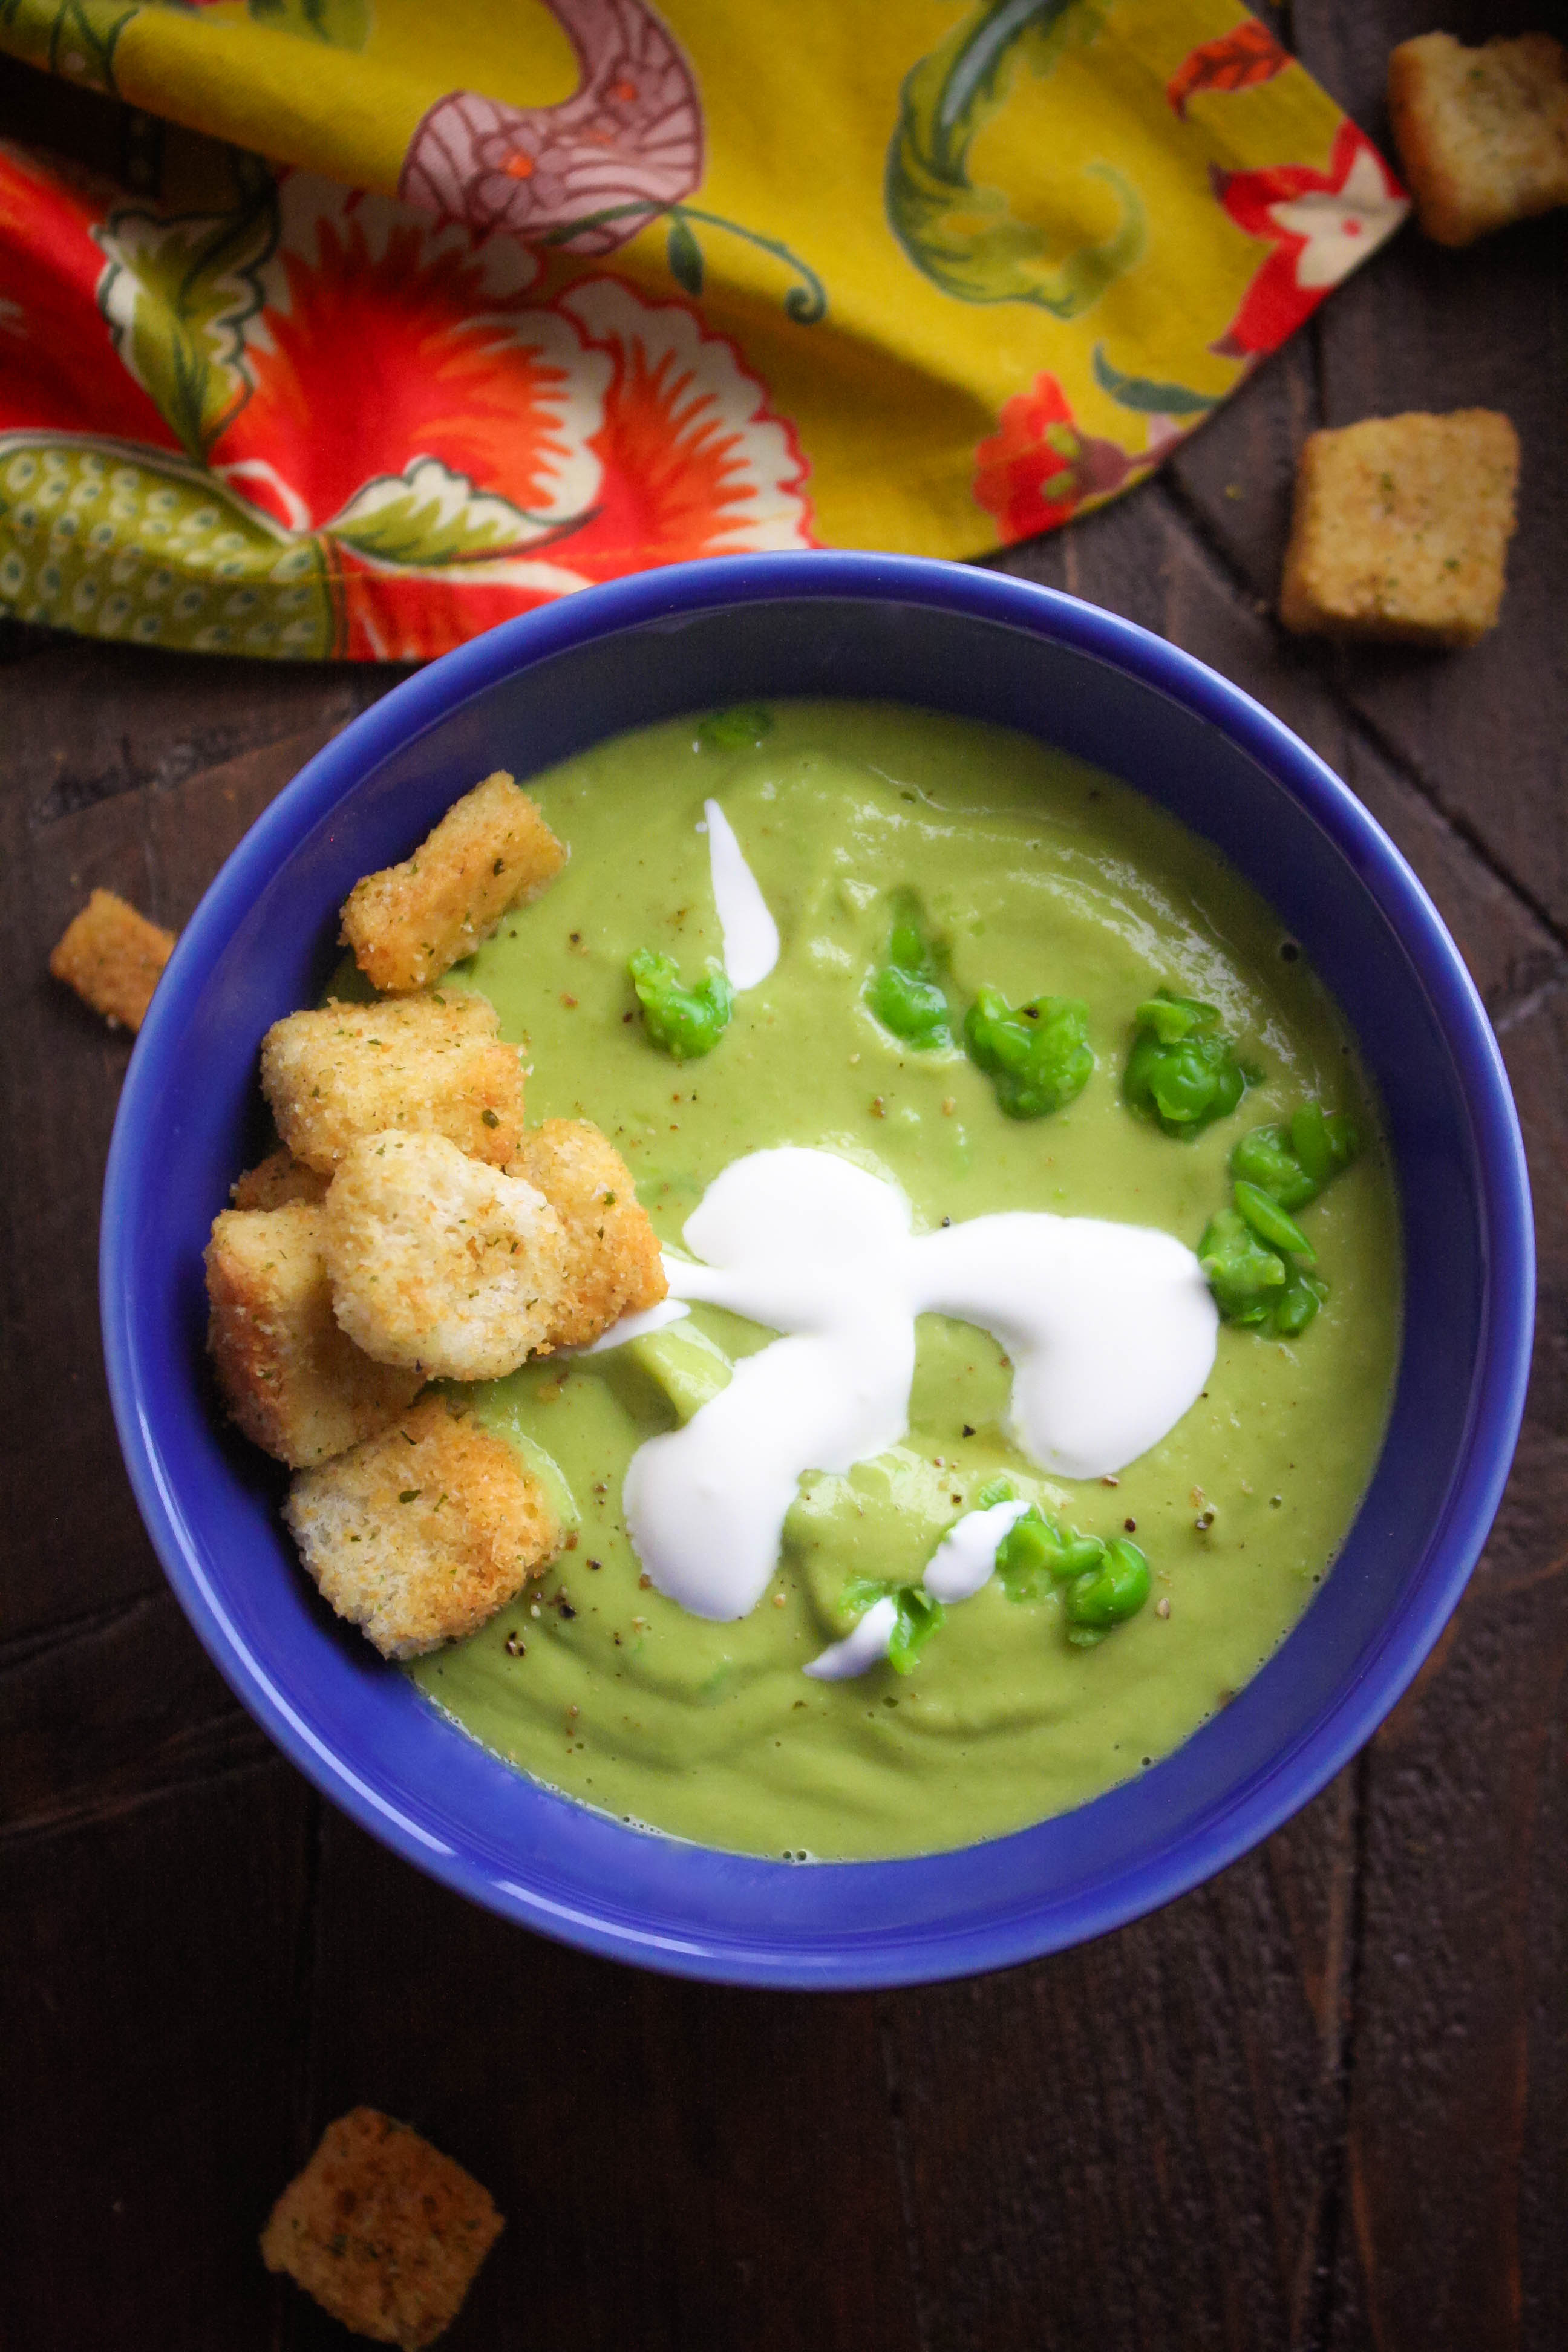 Warm Avocado and Pea Soup is a tasty dish that's perfect for the spring. Warm Avocado and Pea Soup is vegetarian and so tasty for your next meal!